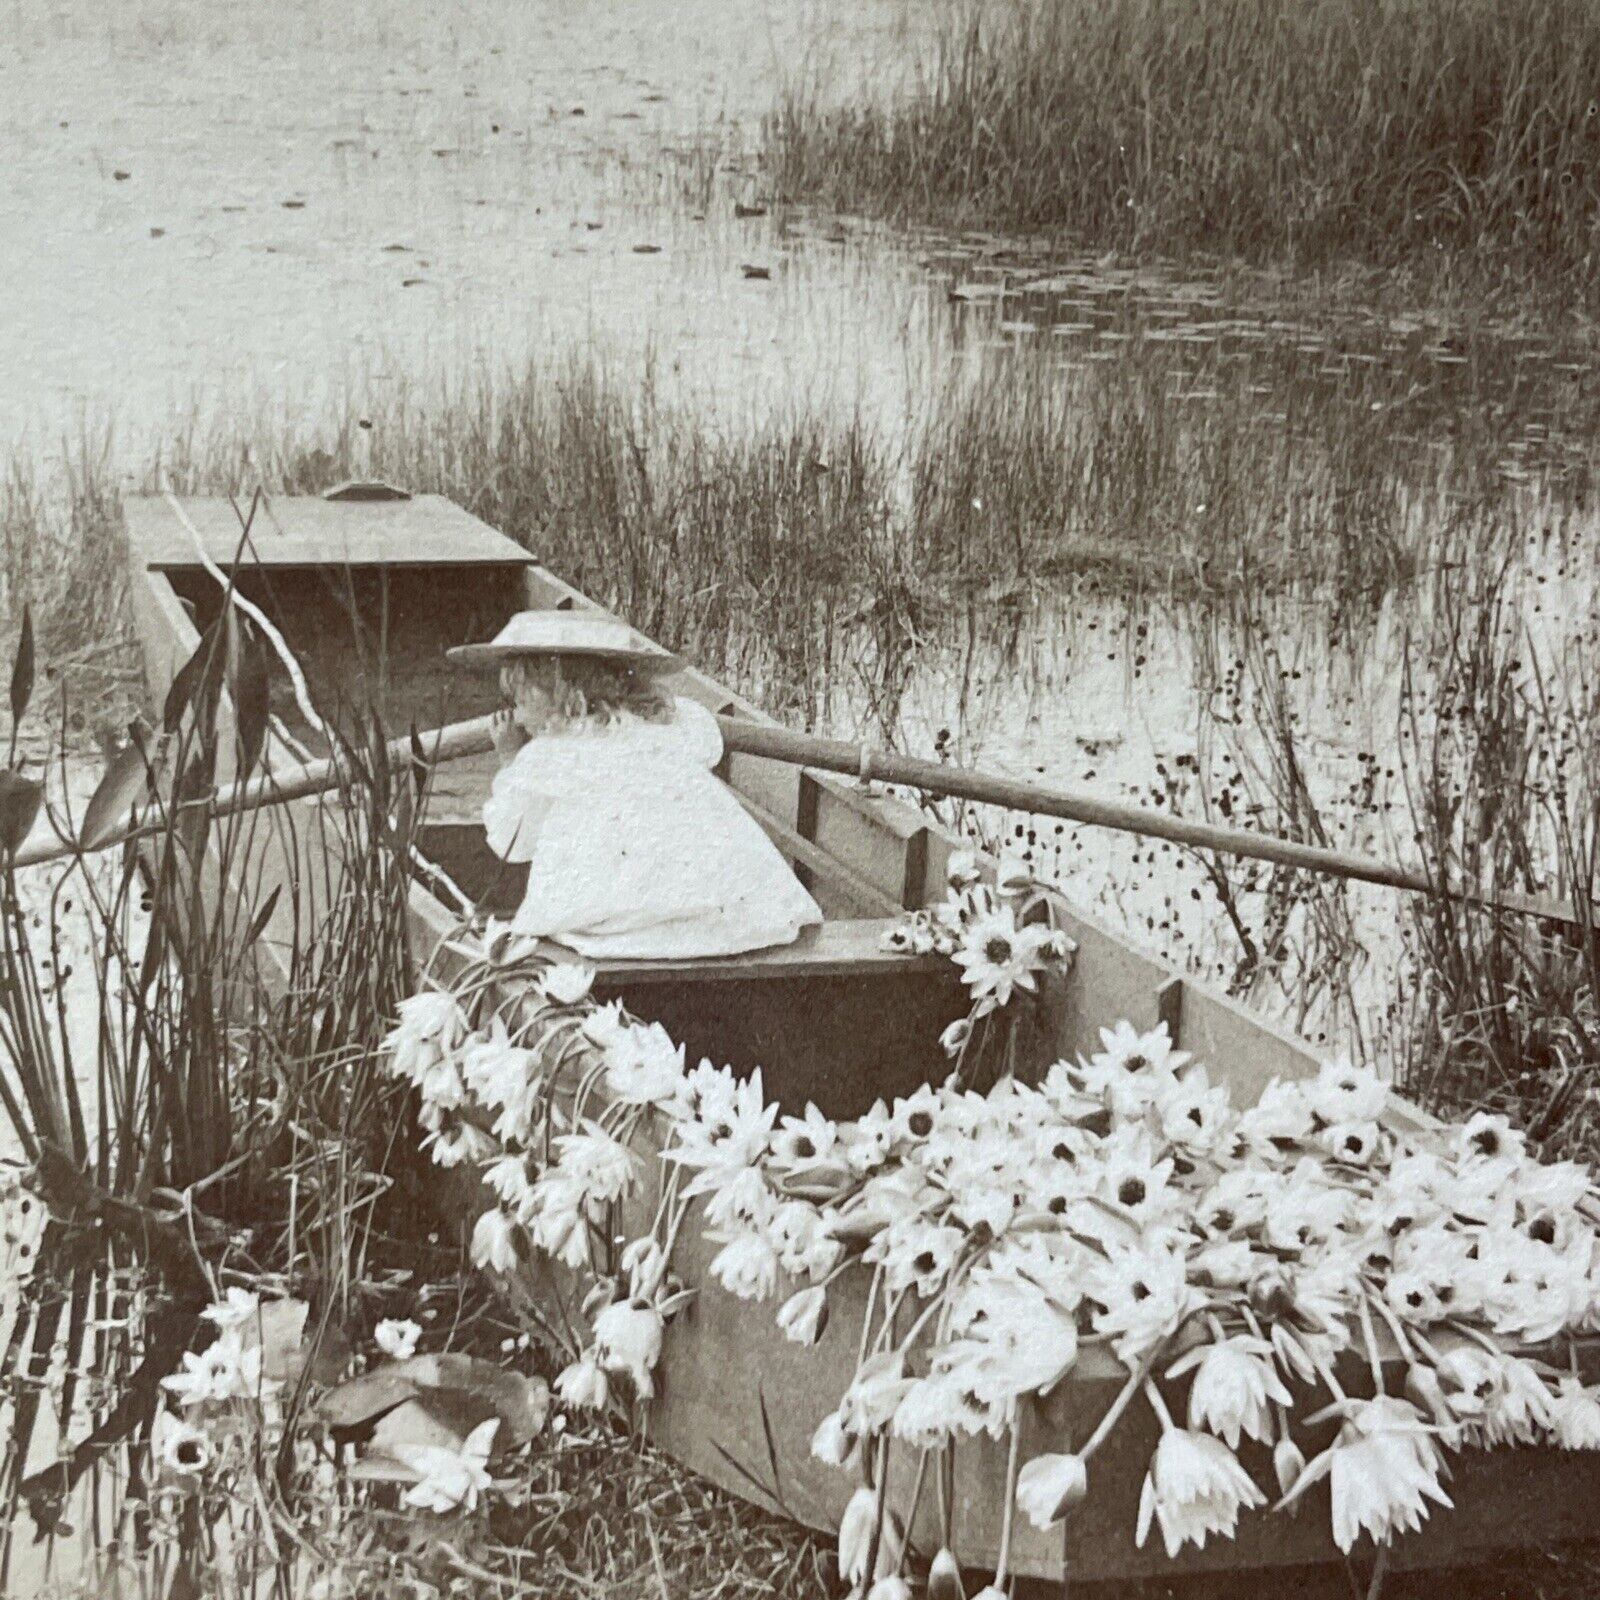 Antique 1899 Rowboat In The Florida Everglades Stereoview Photo Card V3244